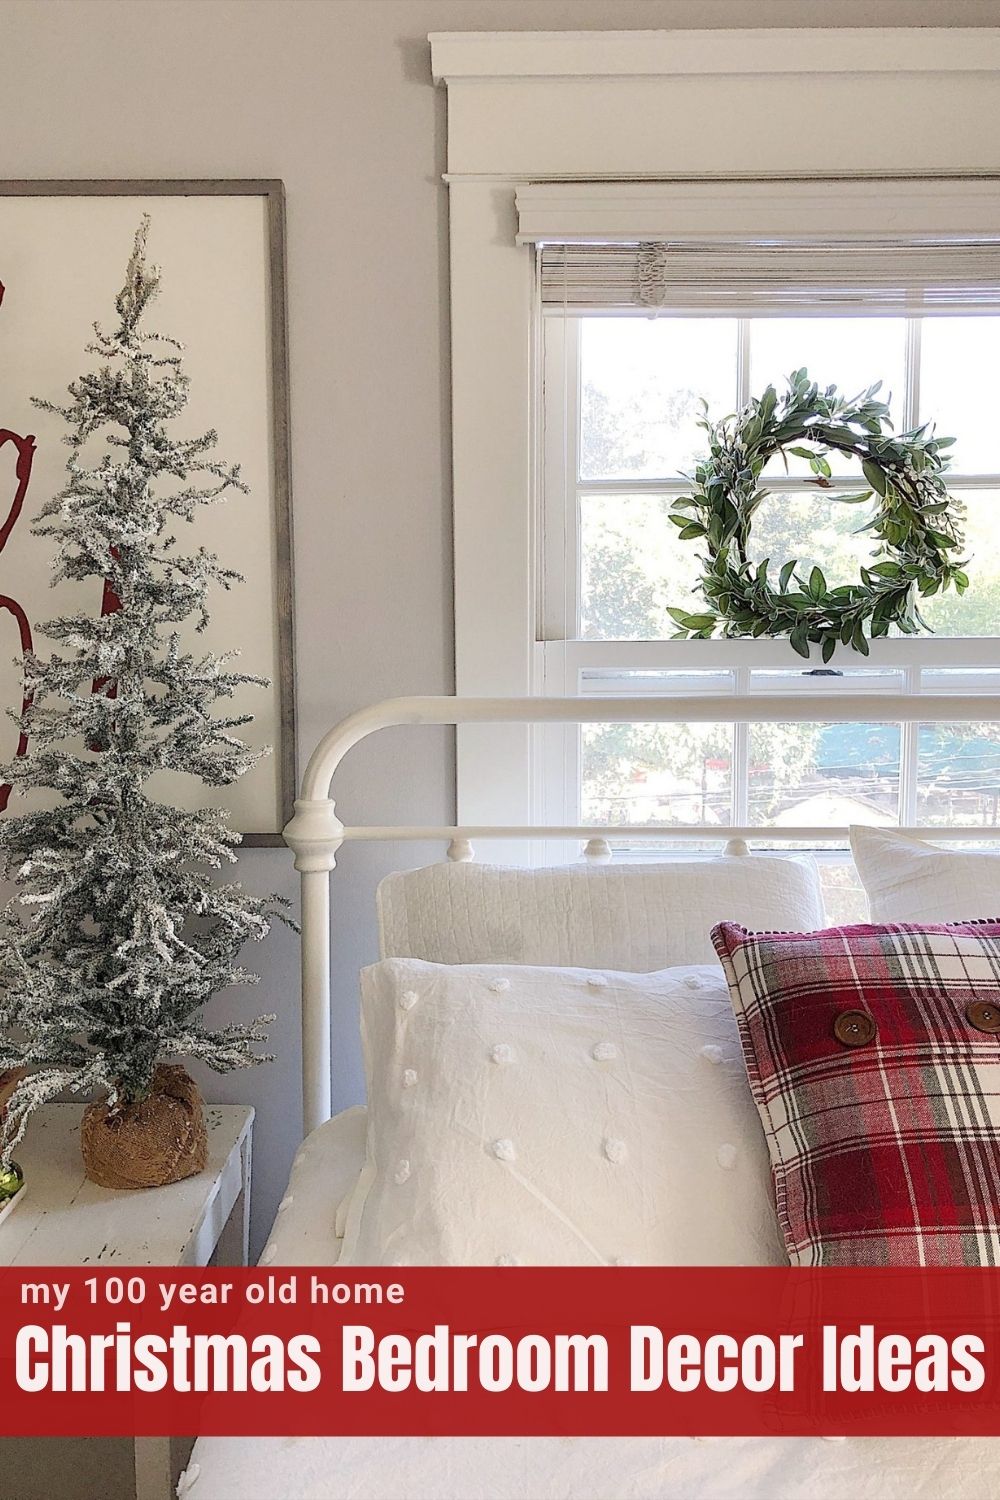 Do you decorate your bedrooms for Christmas? I do, but I usually keep it light. Today I am sharing some fun Christmas bedroom decor ideas.